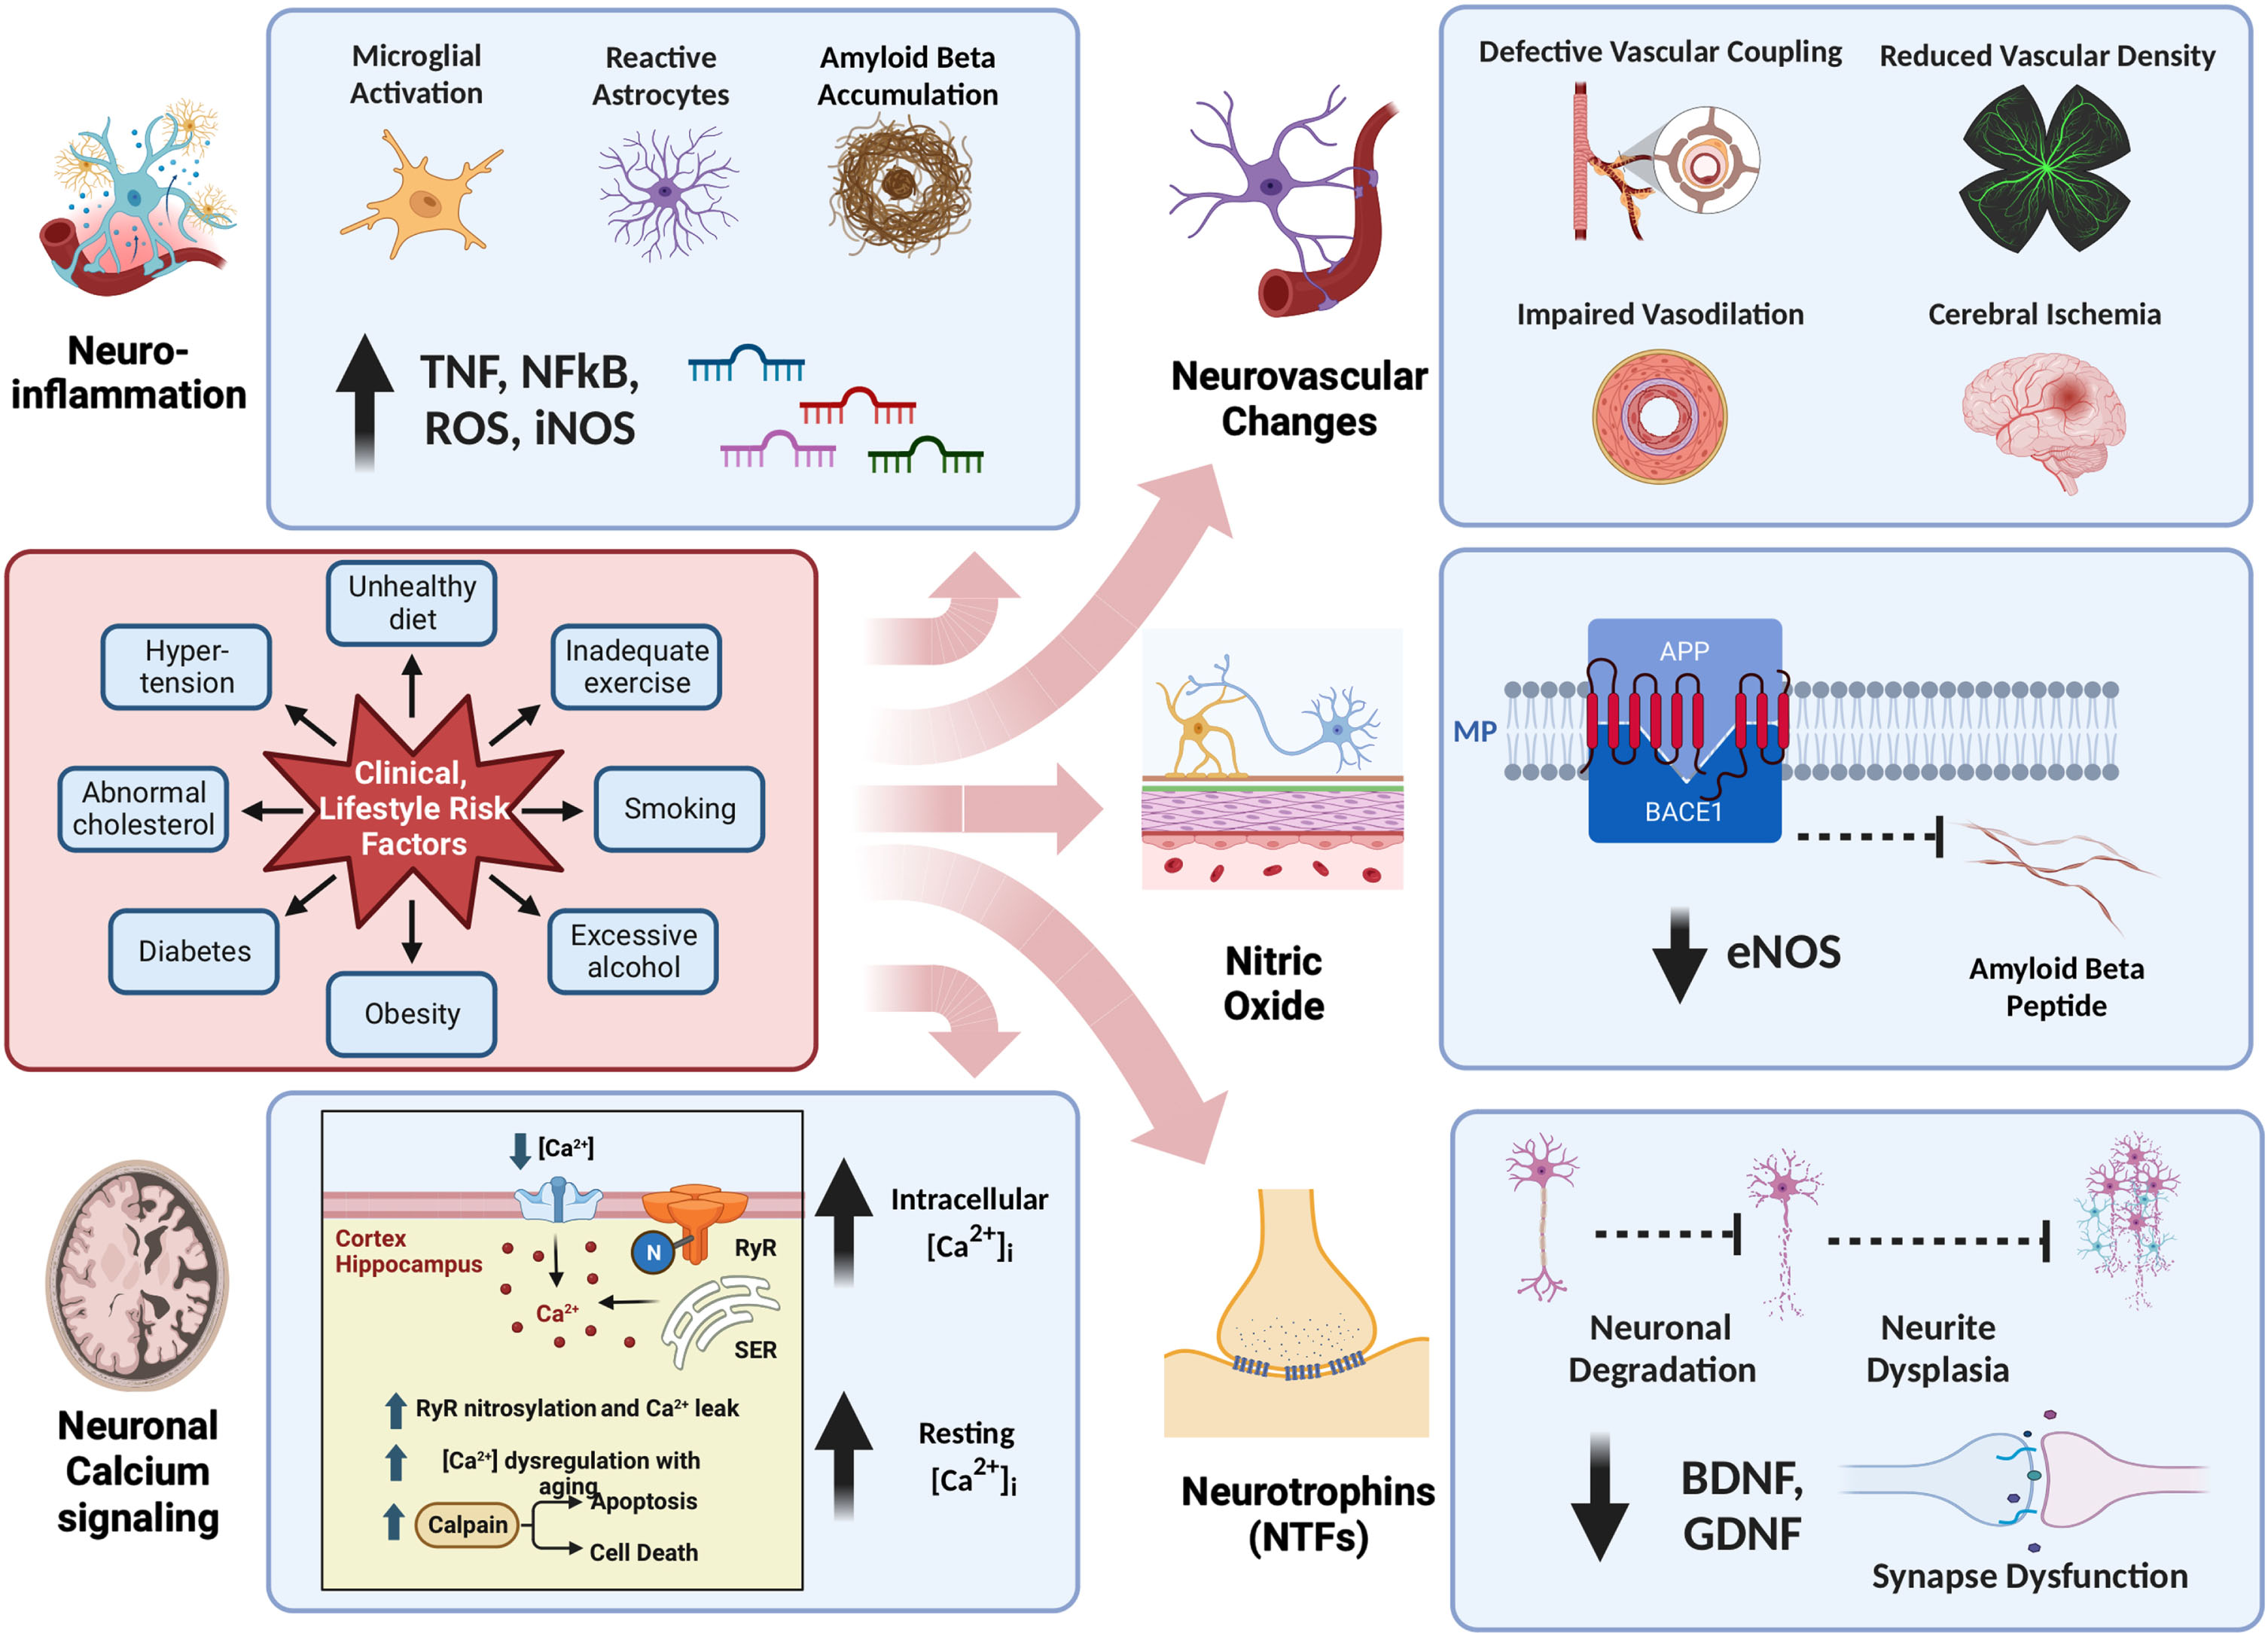 Pathophysiology of Alzheimer’s Disease. This figure offers a comprehensive overview of the intricate pathophysiology of Alzheimer’s disease, organized into five major categories: a) Neuroinflammation, b) Neuronal Calcium Signaling, c) Neurovascular Changes, d) Nitric Oxide, and e) Neurotrophins. Notably, Lifestyle Risk Factors exert a significant influence on all or some of these five categories, underscoring the multifaceted nature of their impact on Alzheimer’s disease.